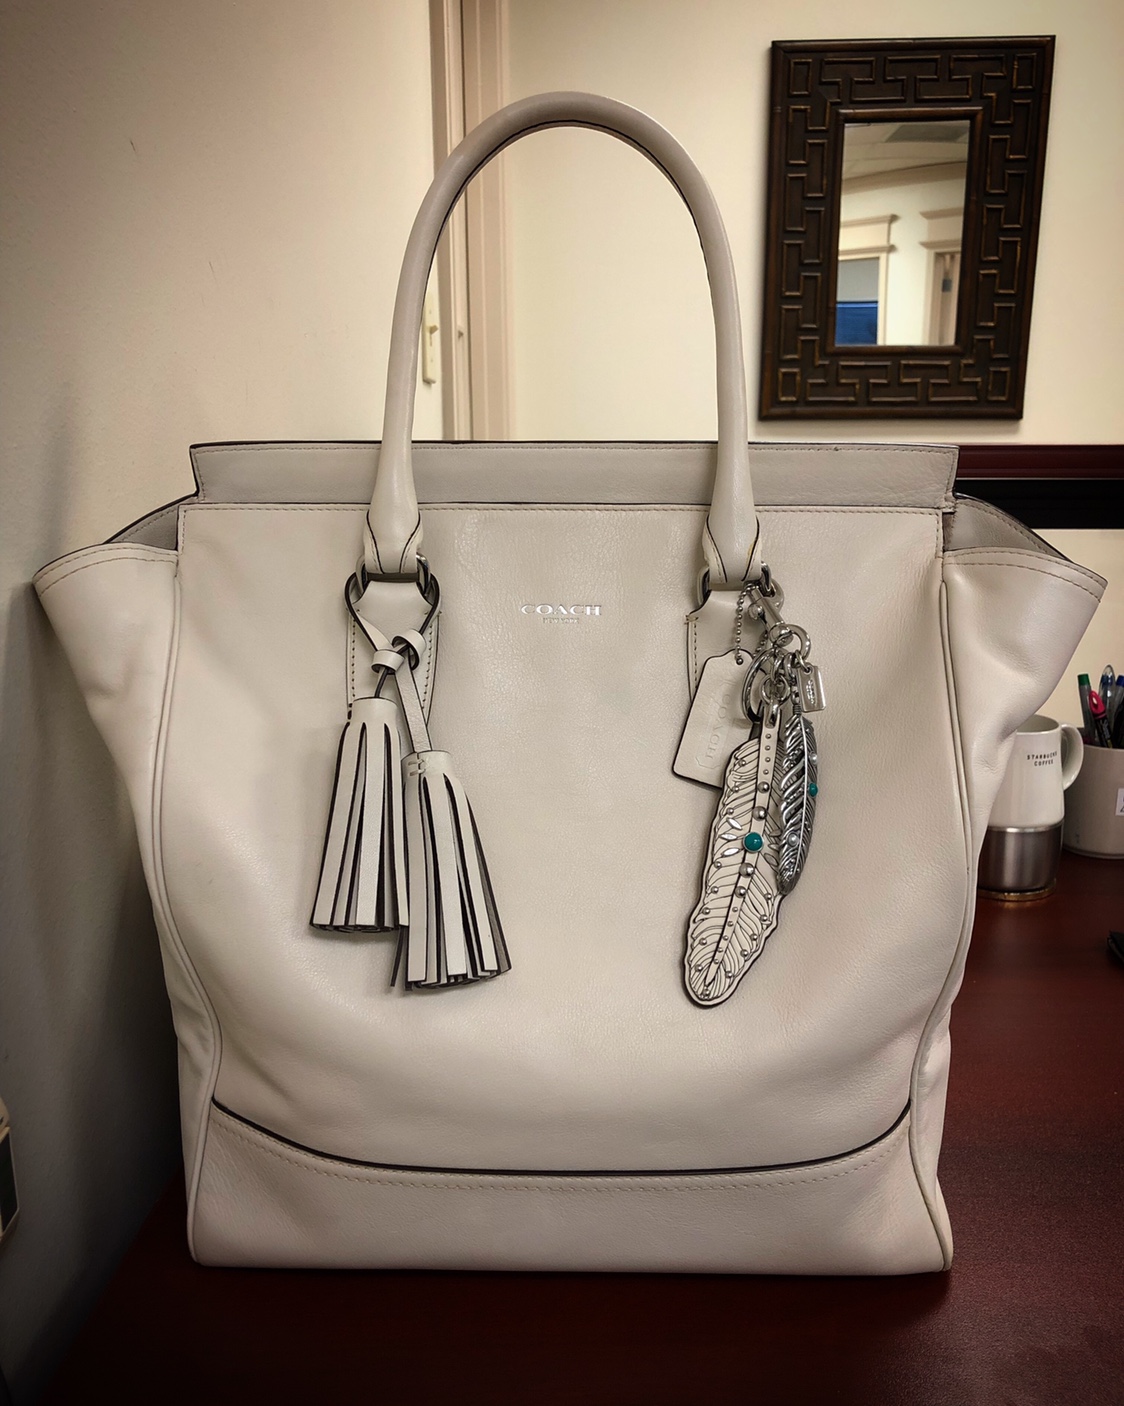 Which COACH bag are you carrying today? | Page 1043 - PurseForum